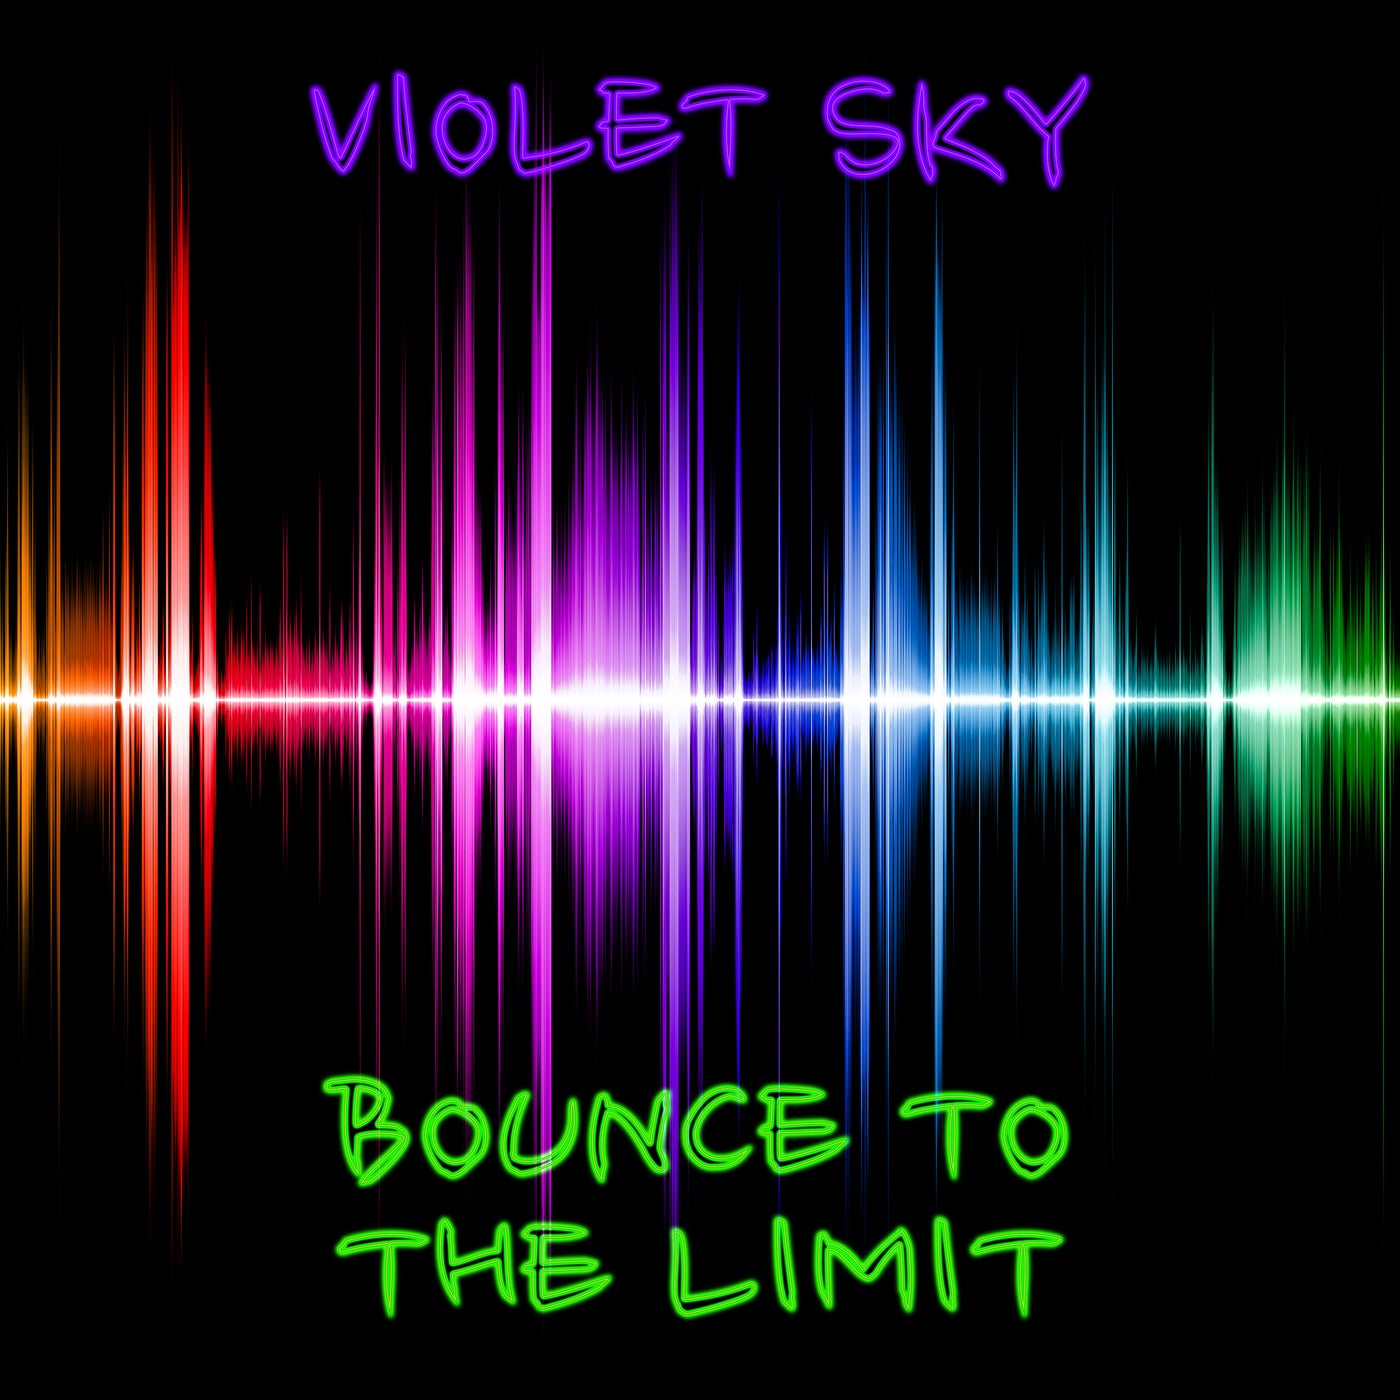 Bounce to the Limit